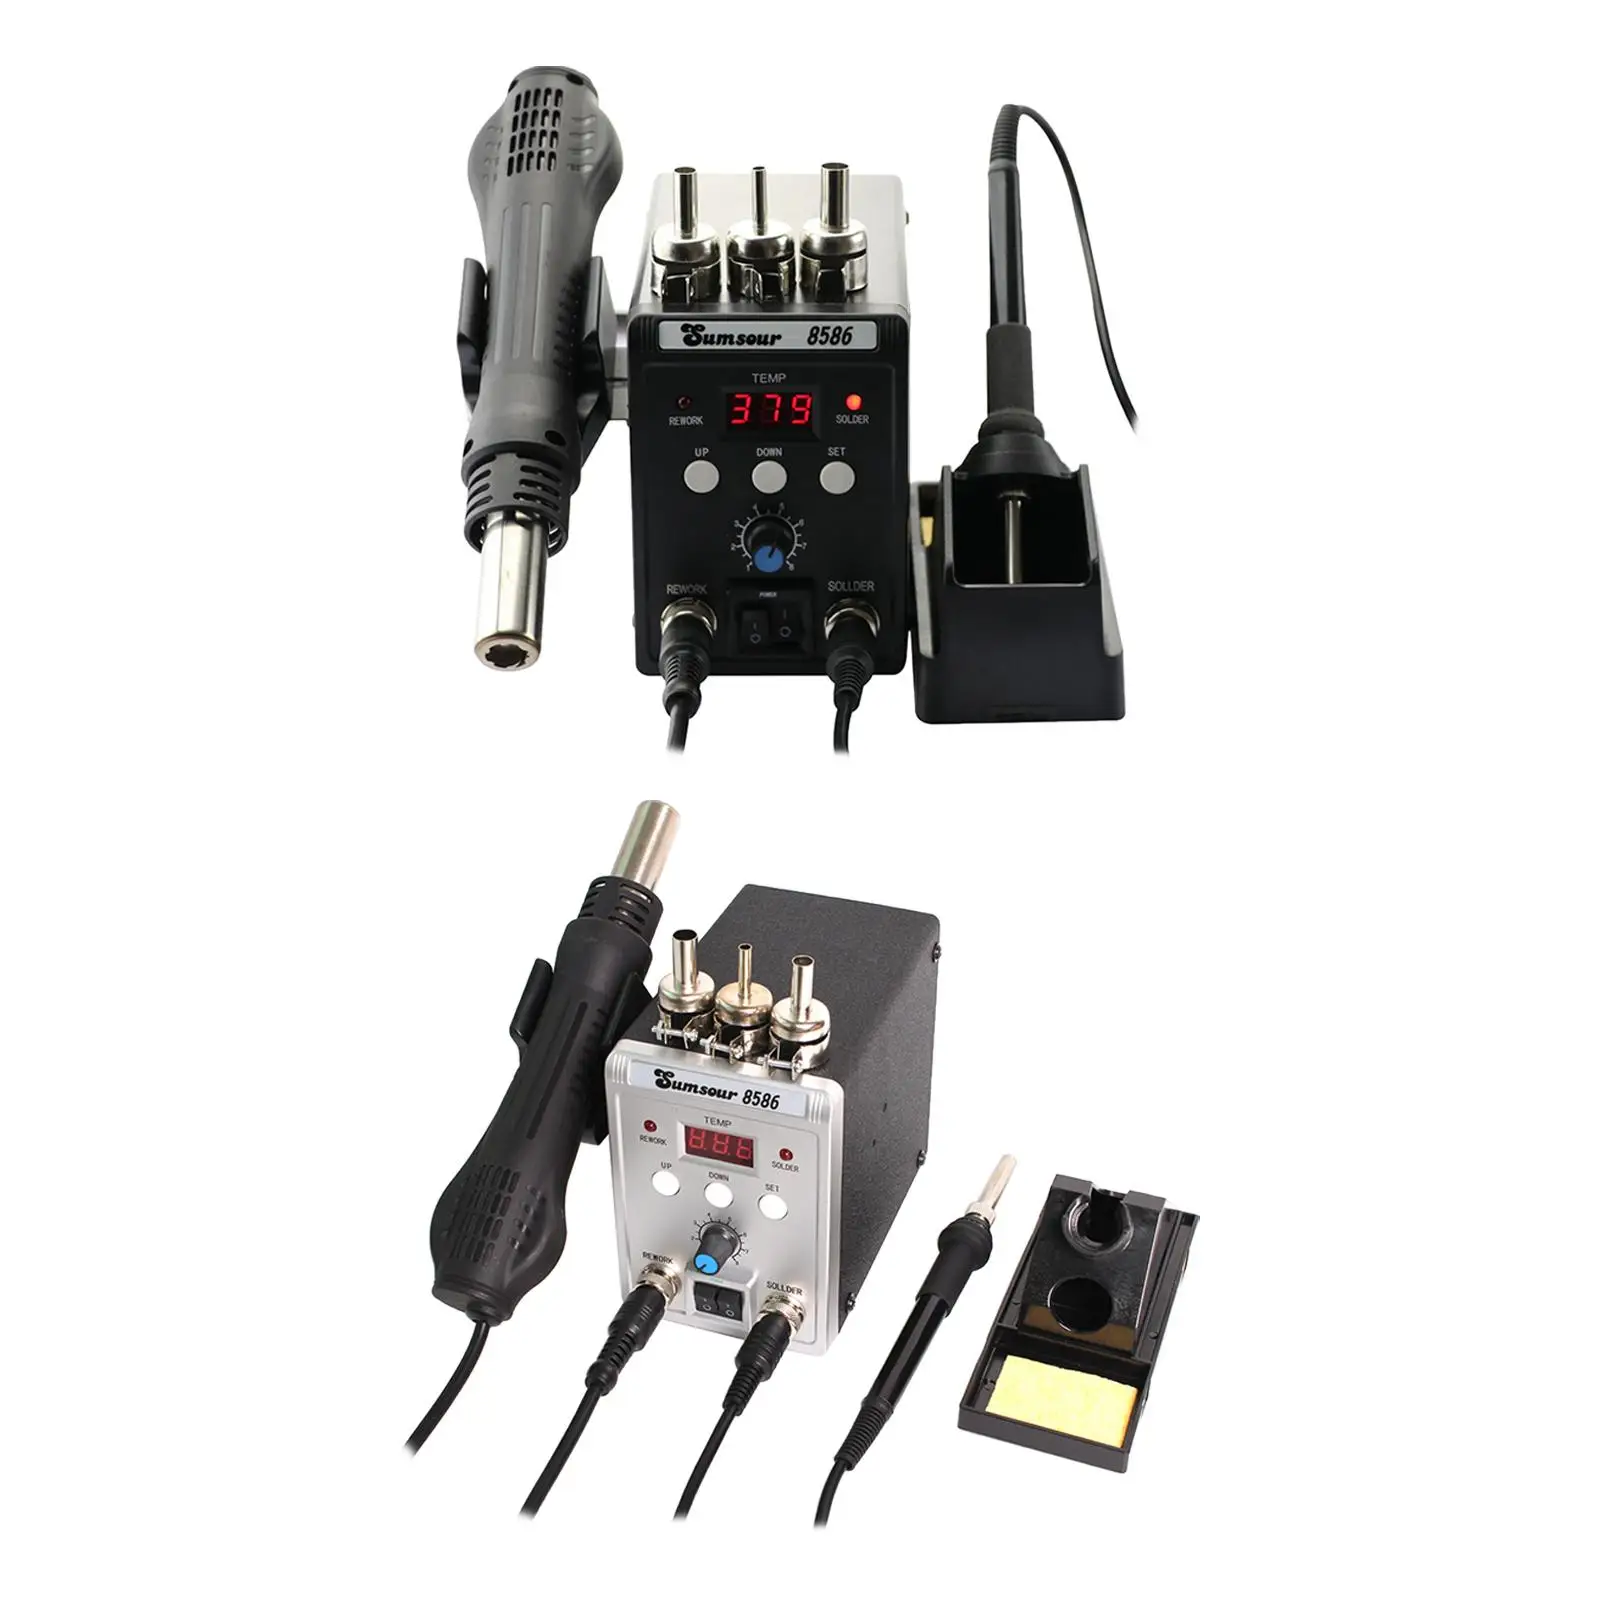 60W Soldering Station Adjust Temperature with Metal Holder Hot Air Rework Electric Welding Tool for Maintenance Home Appliance